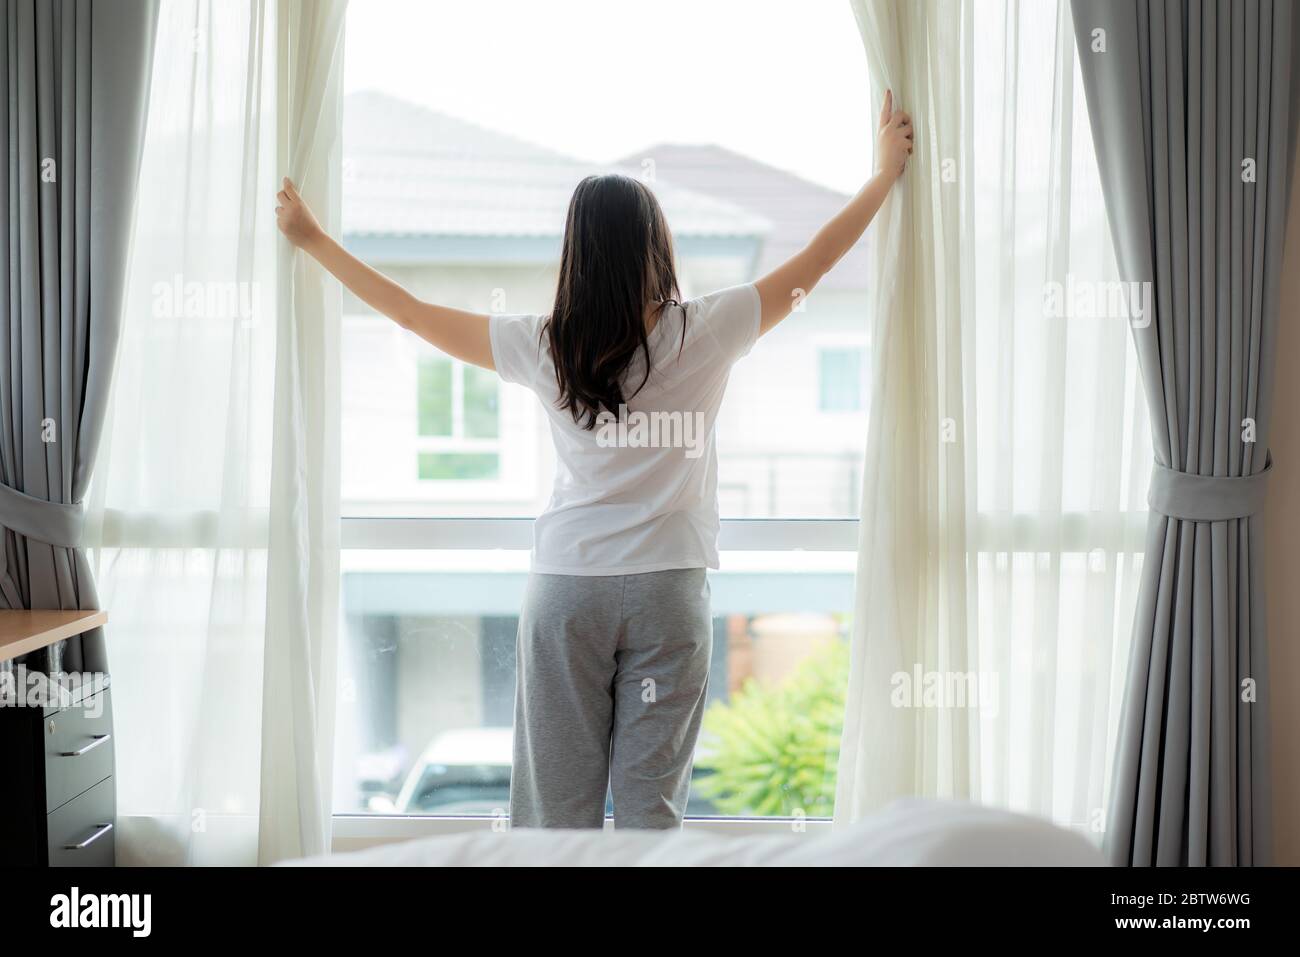 Rear view of Asian woman waking up in her bed fully rested opening window curtains and looking through the window in bedroom at home. Stock Photo